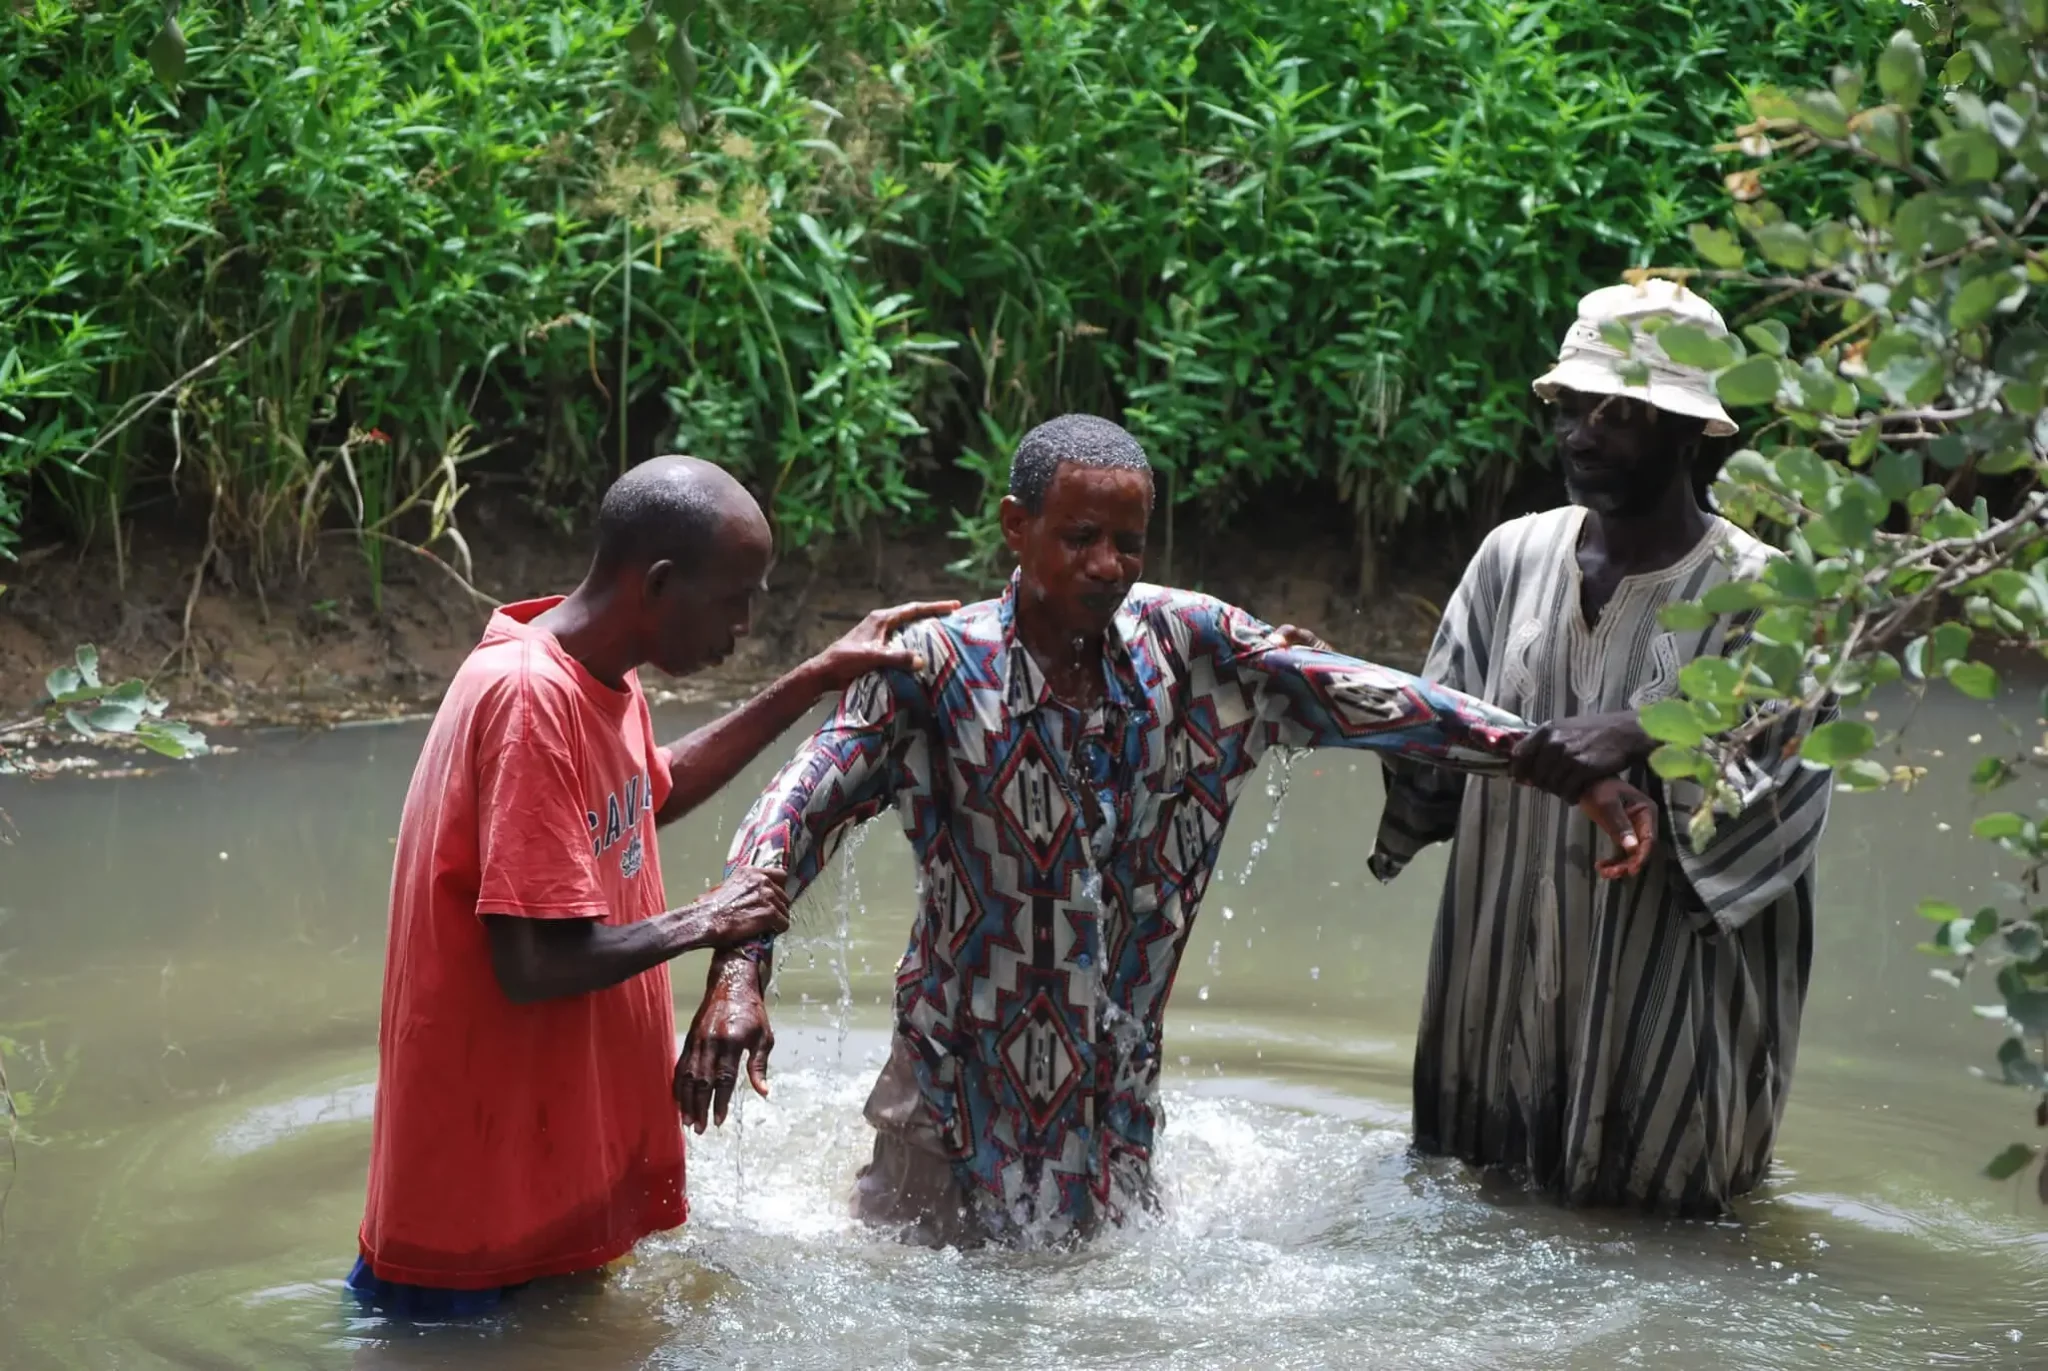 Two men baptizing a man in the jungle. The man in the middle was baptized and is emerging from the water with help from the other two men.